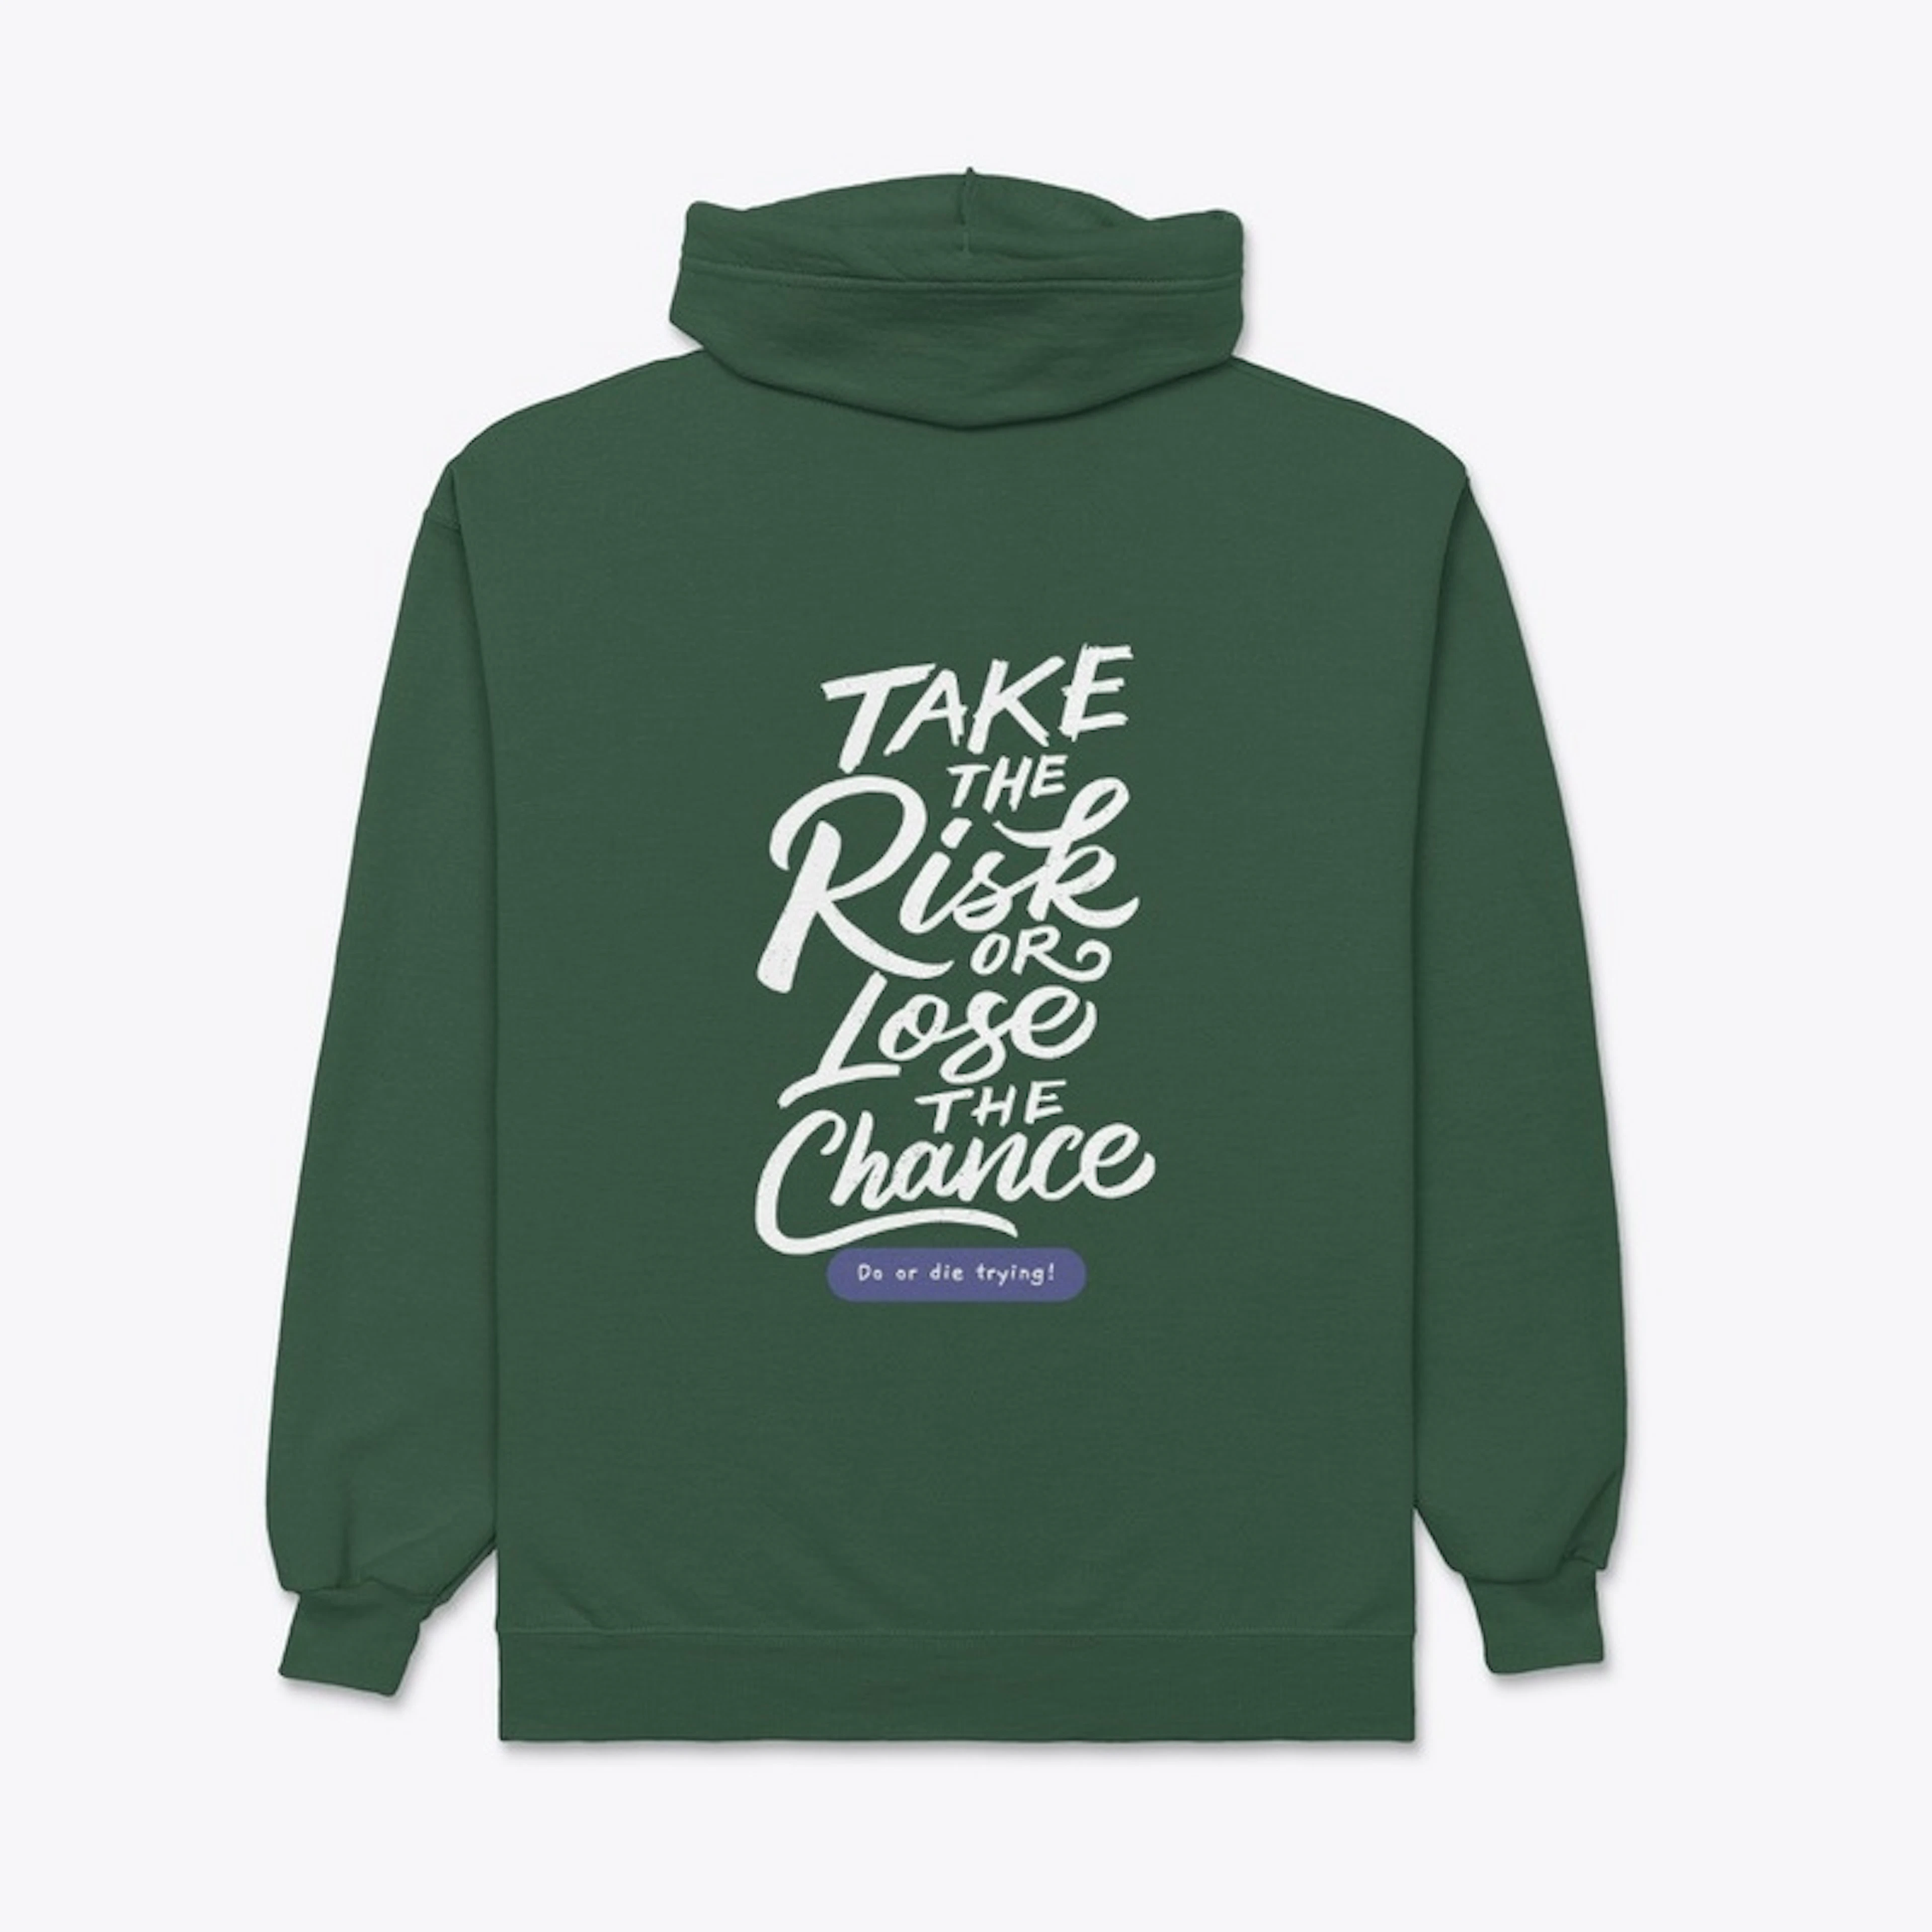 Take The Risk or Lose The Chanse